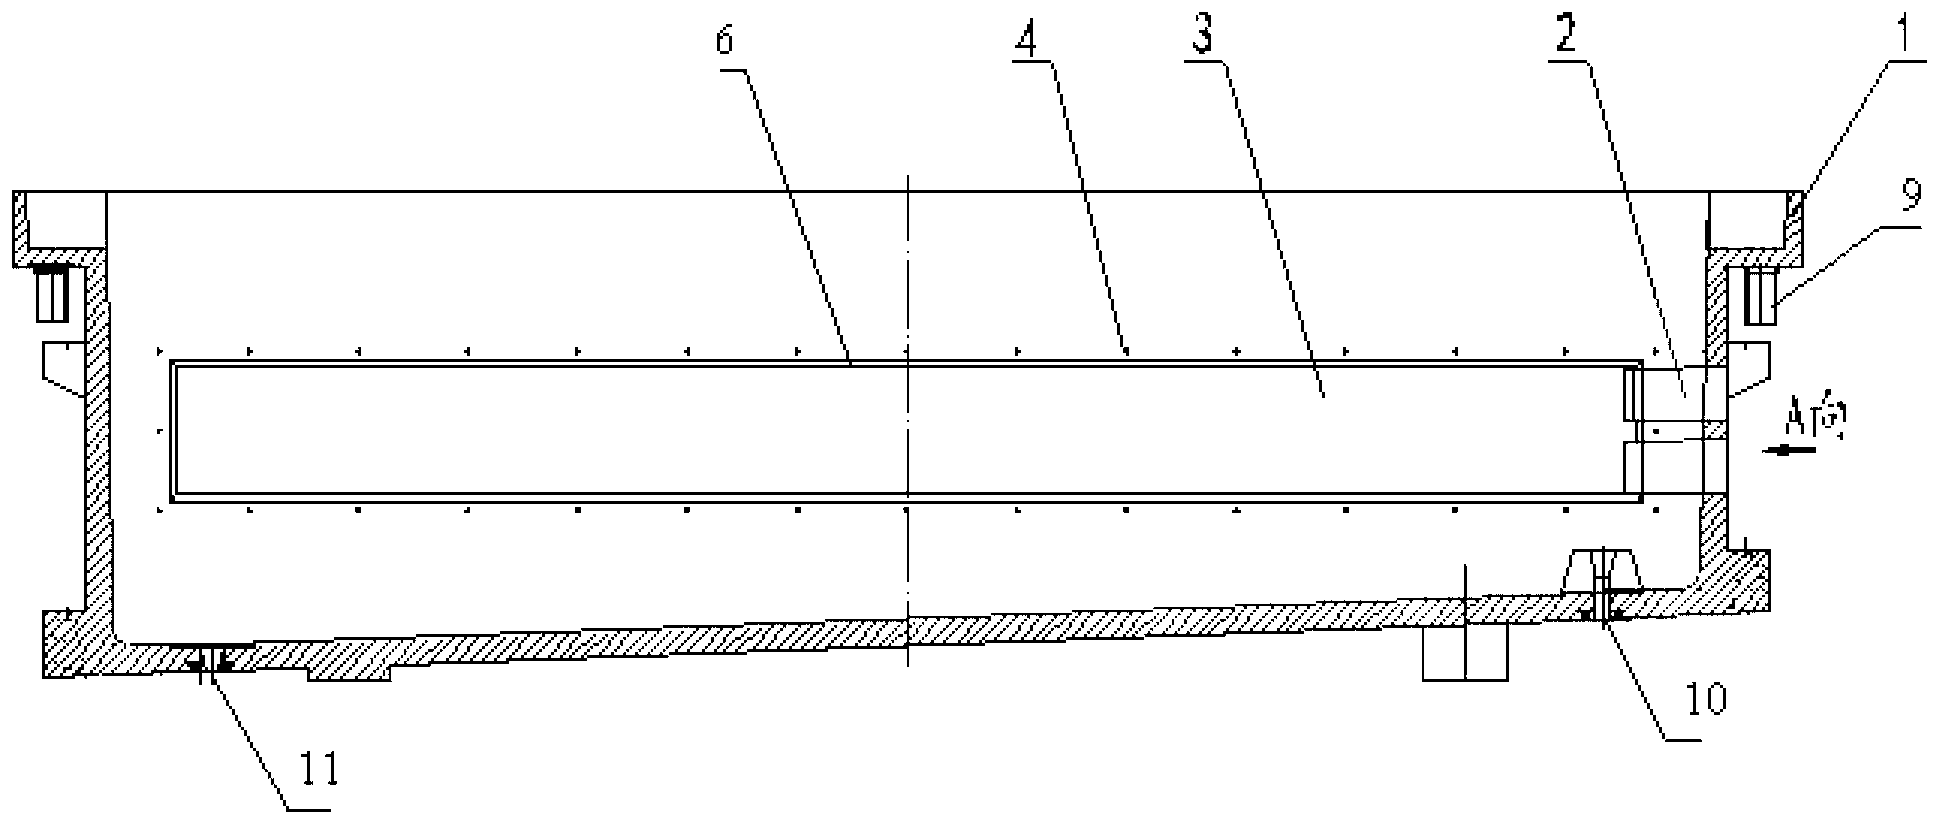 Ultrahigh current density electrolysis or electro-deposition groove